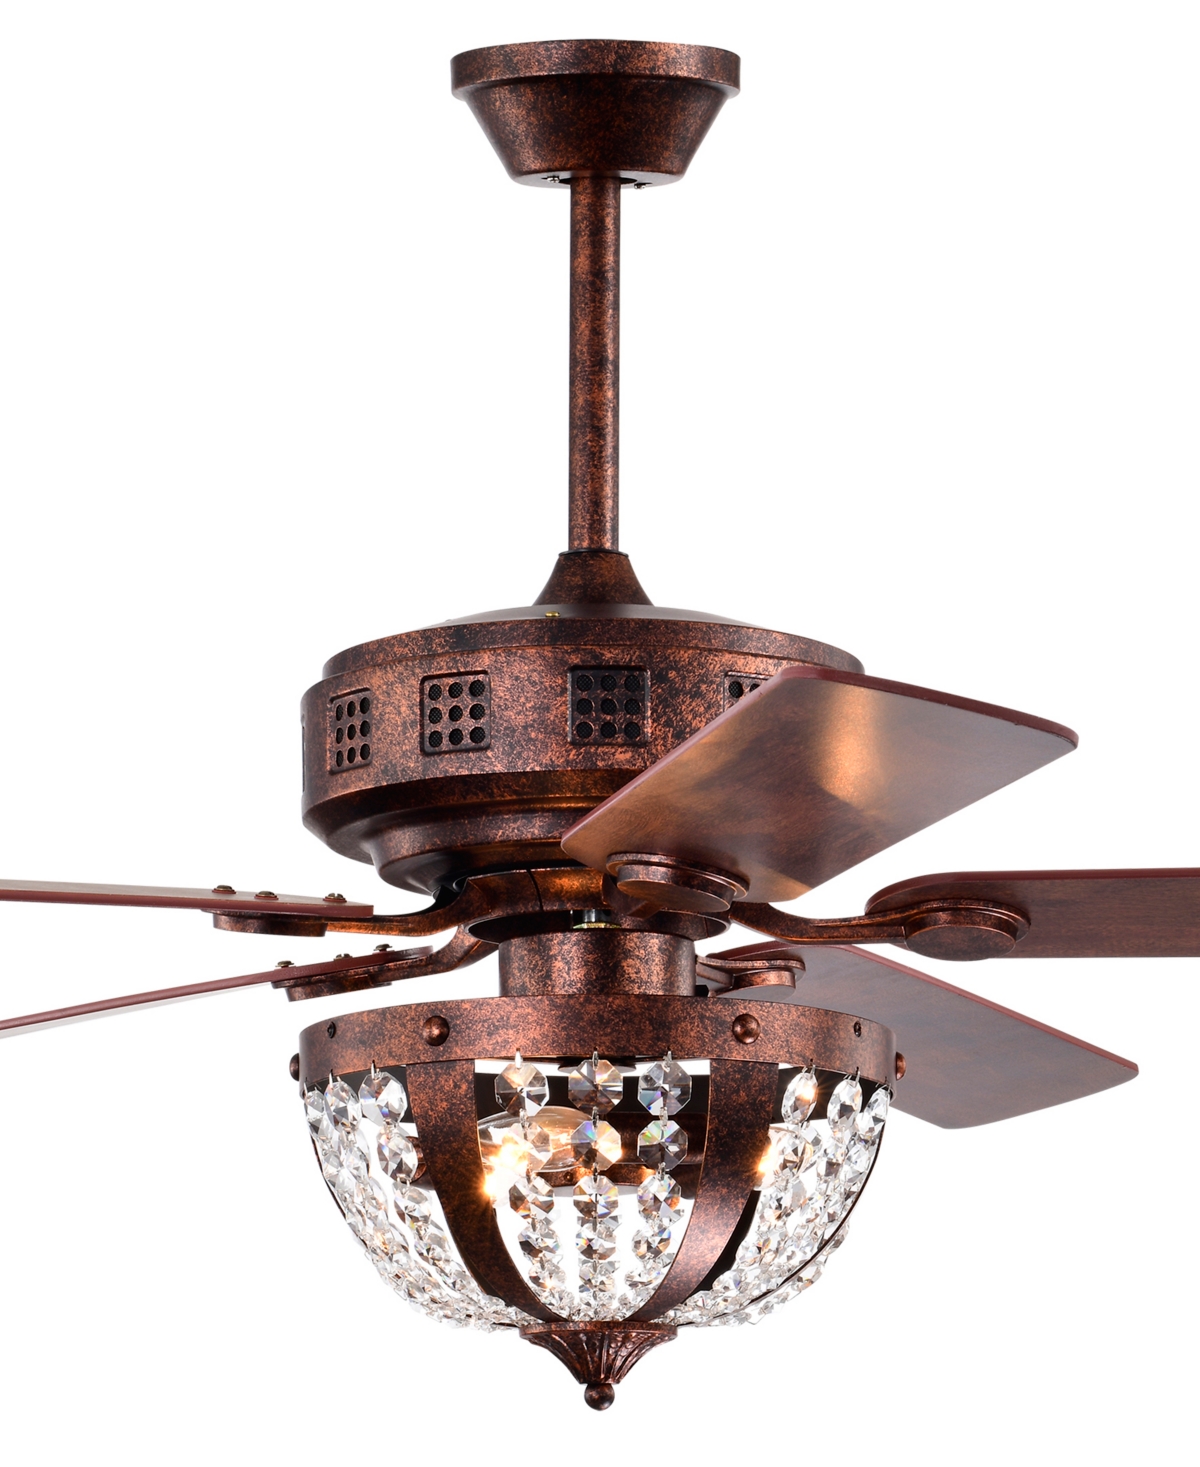 Home Accessories Chandler 52" 3-light Indoor Ceiling Fan With Light Kit And Remote In Antique Copper